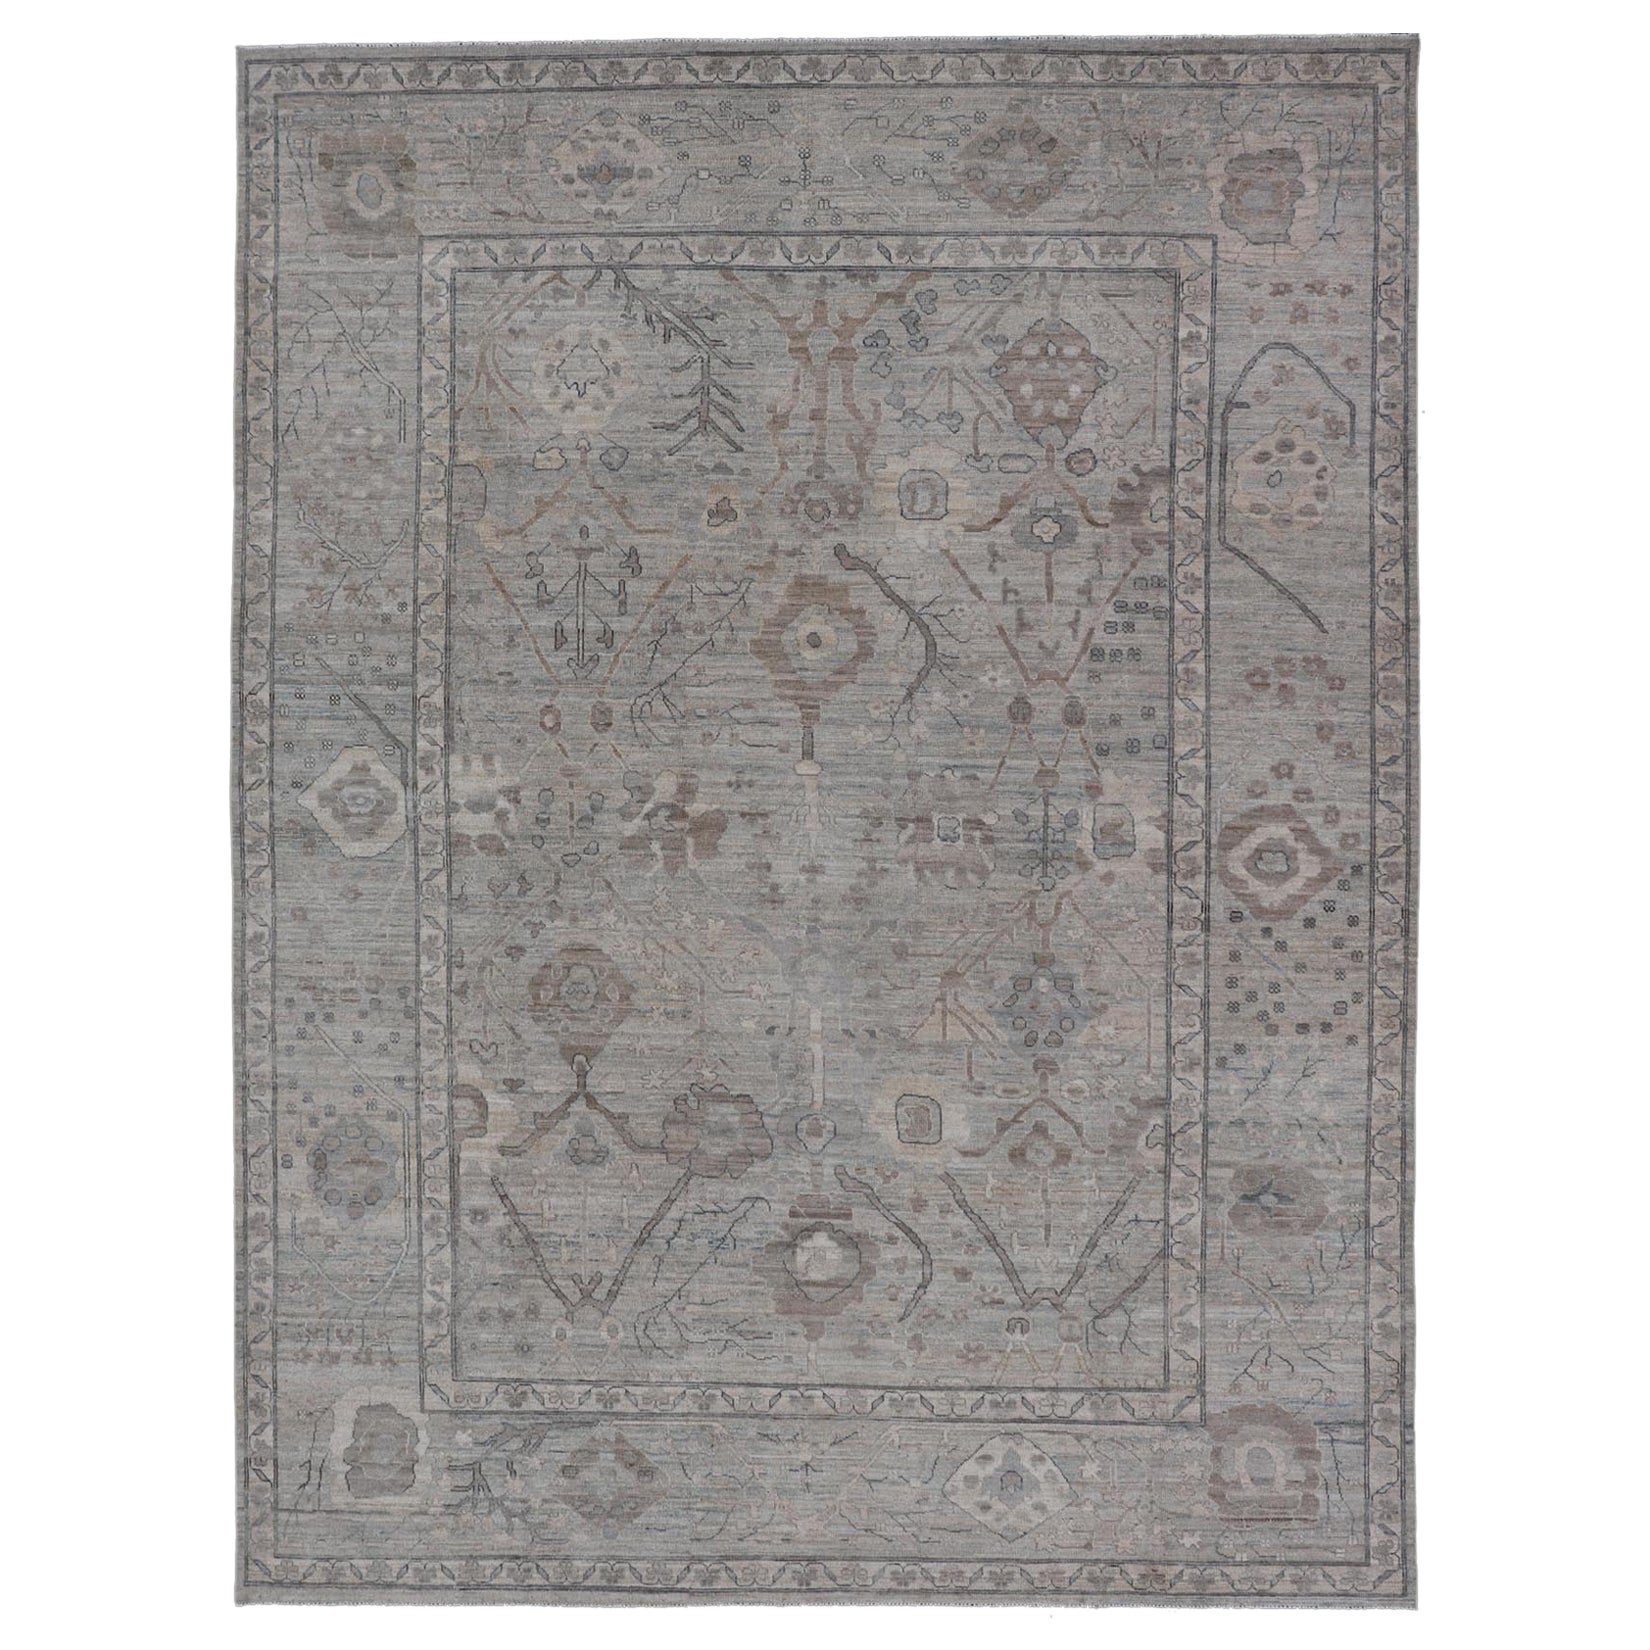 Modern Oushak Rug in Light Color Background with All-Over Tribal Motifs